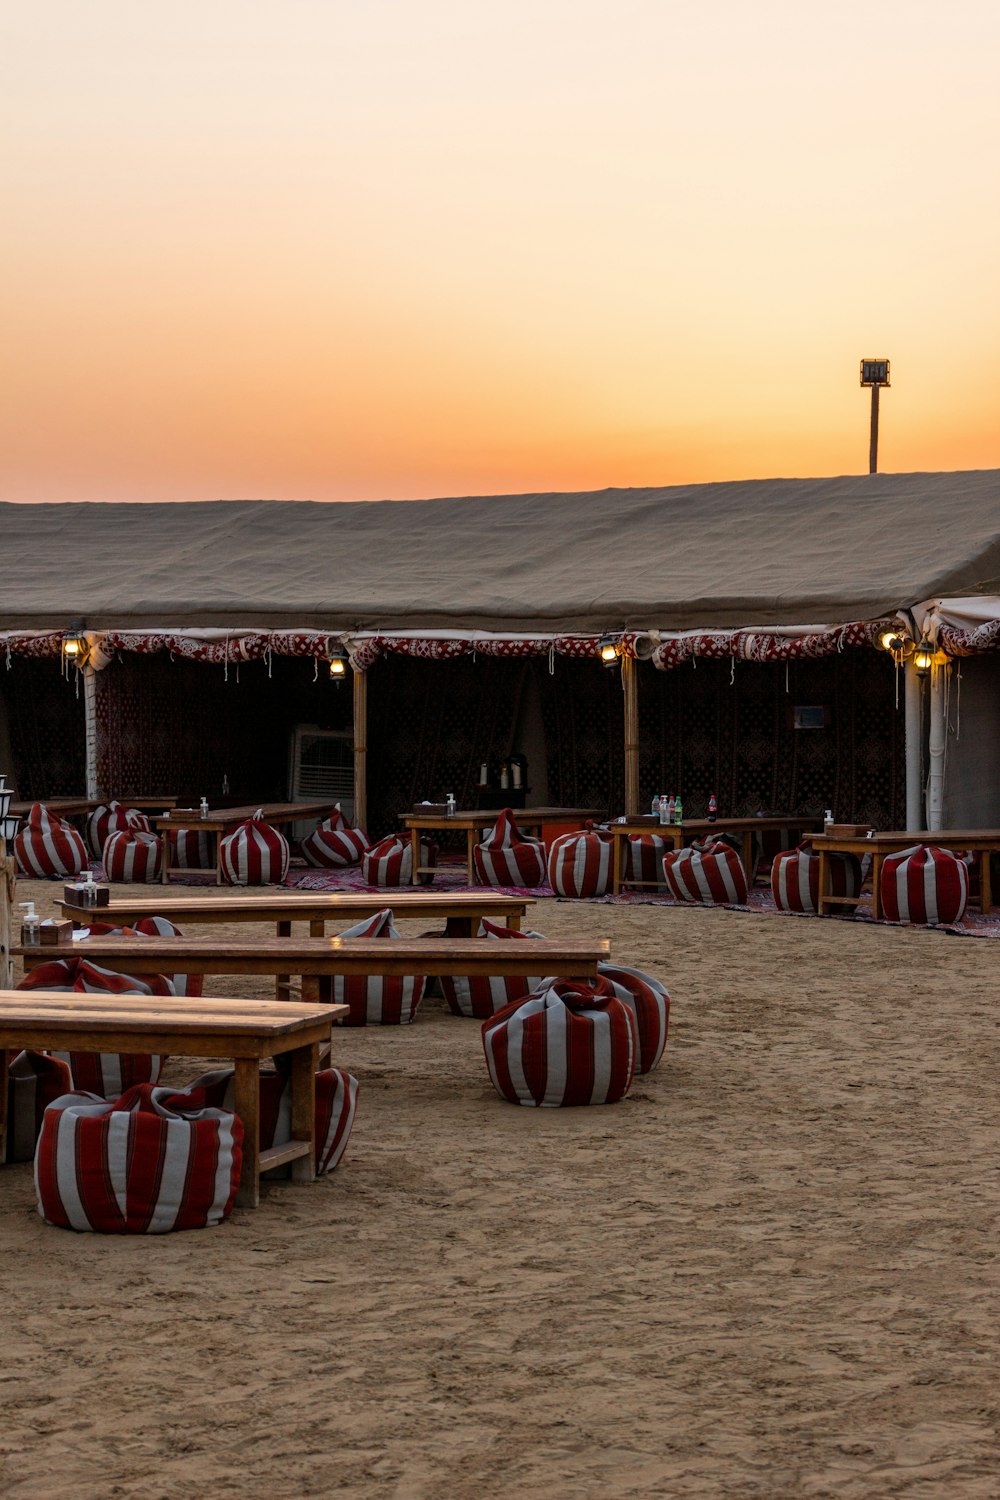 a sandy area with benches and tables in the sand